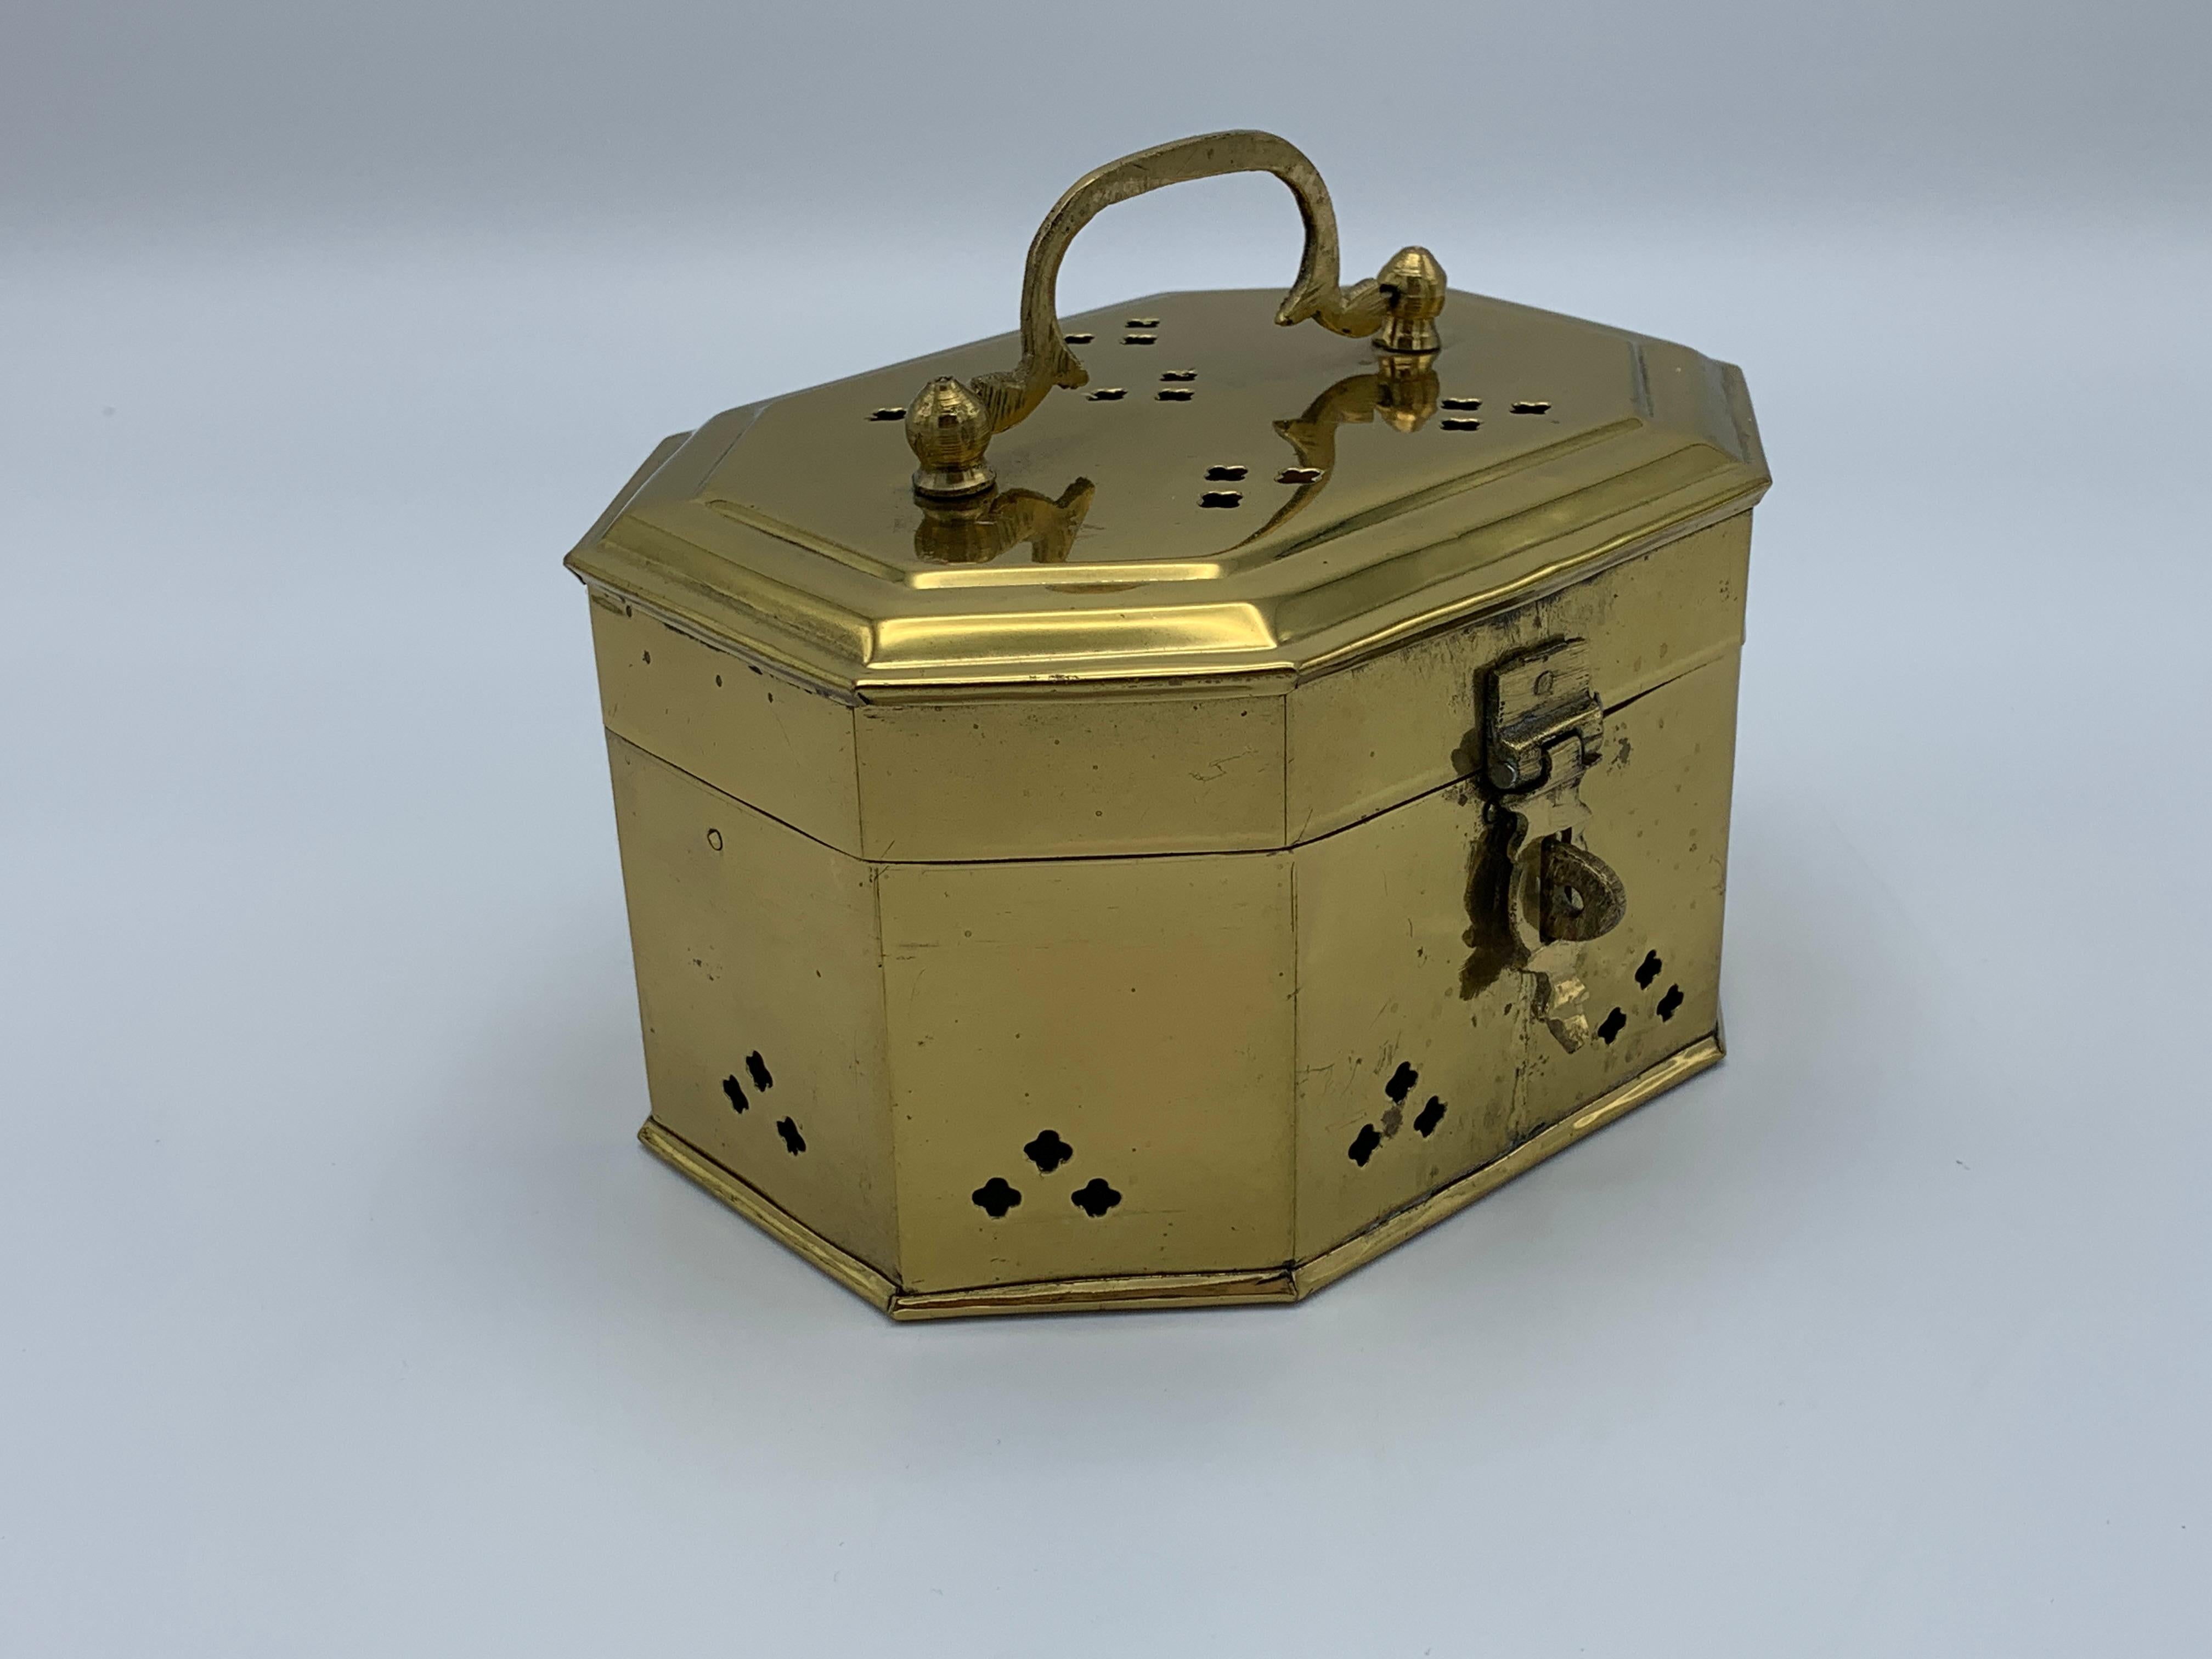 Offered is a gorgeous, 1960's pierced brass cricket box. The box is finished with a clear lacquer, giving a freshly polished look all year round.